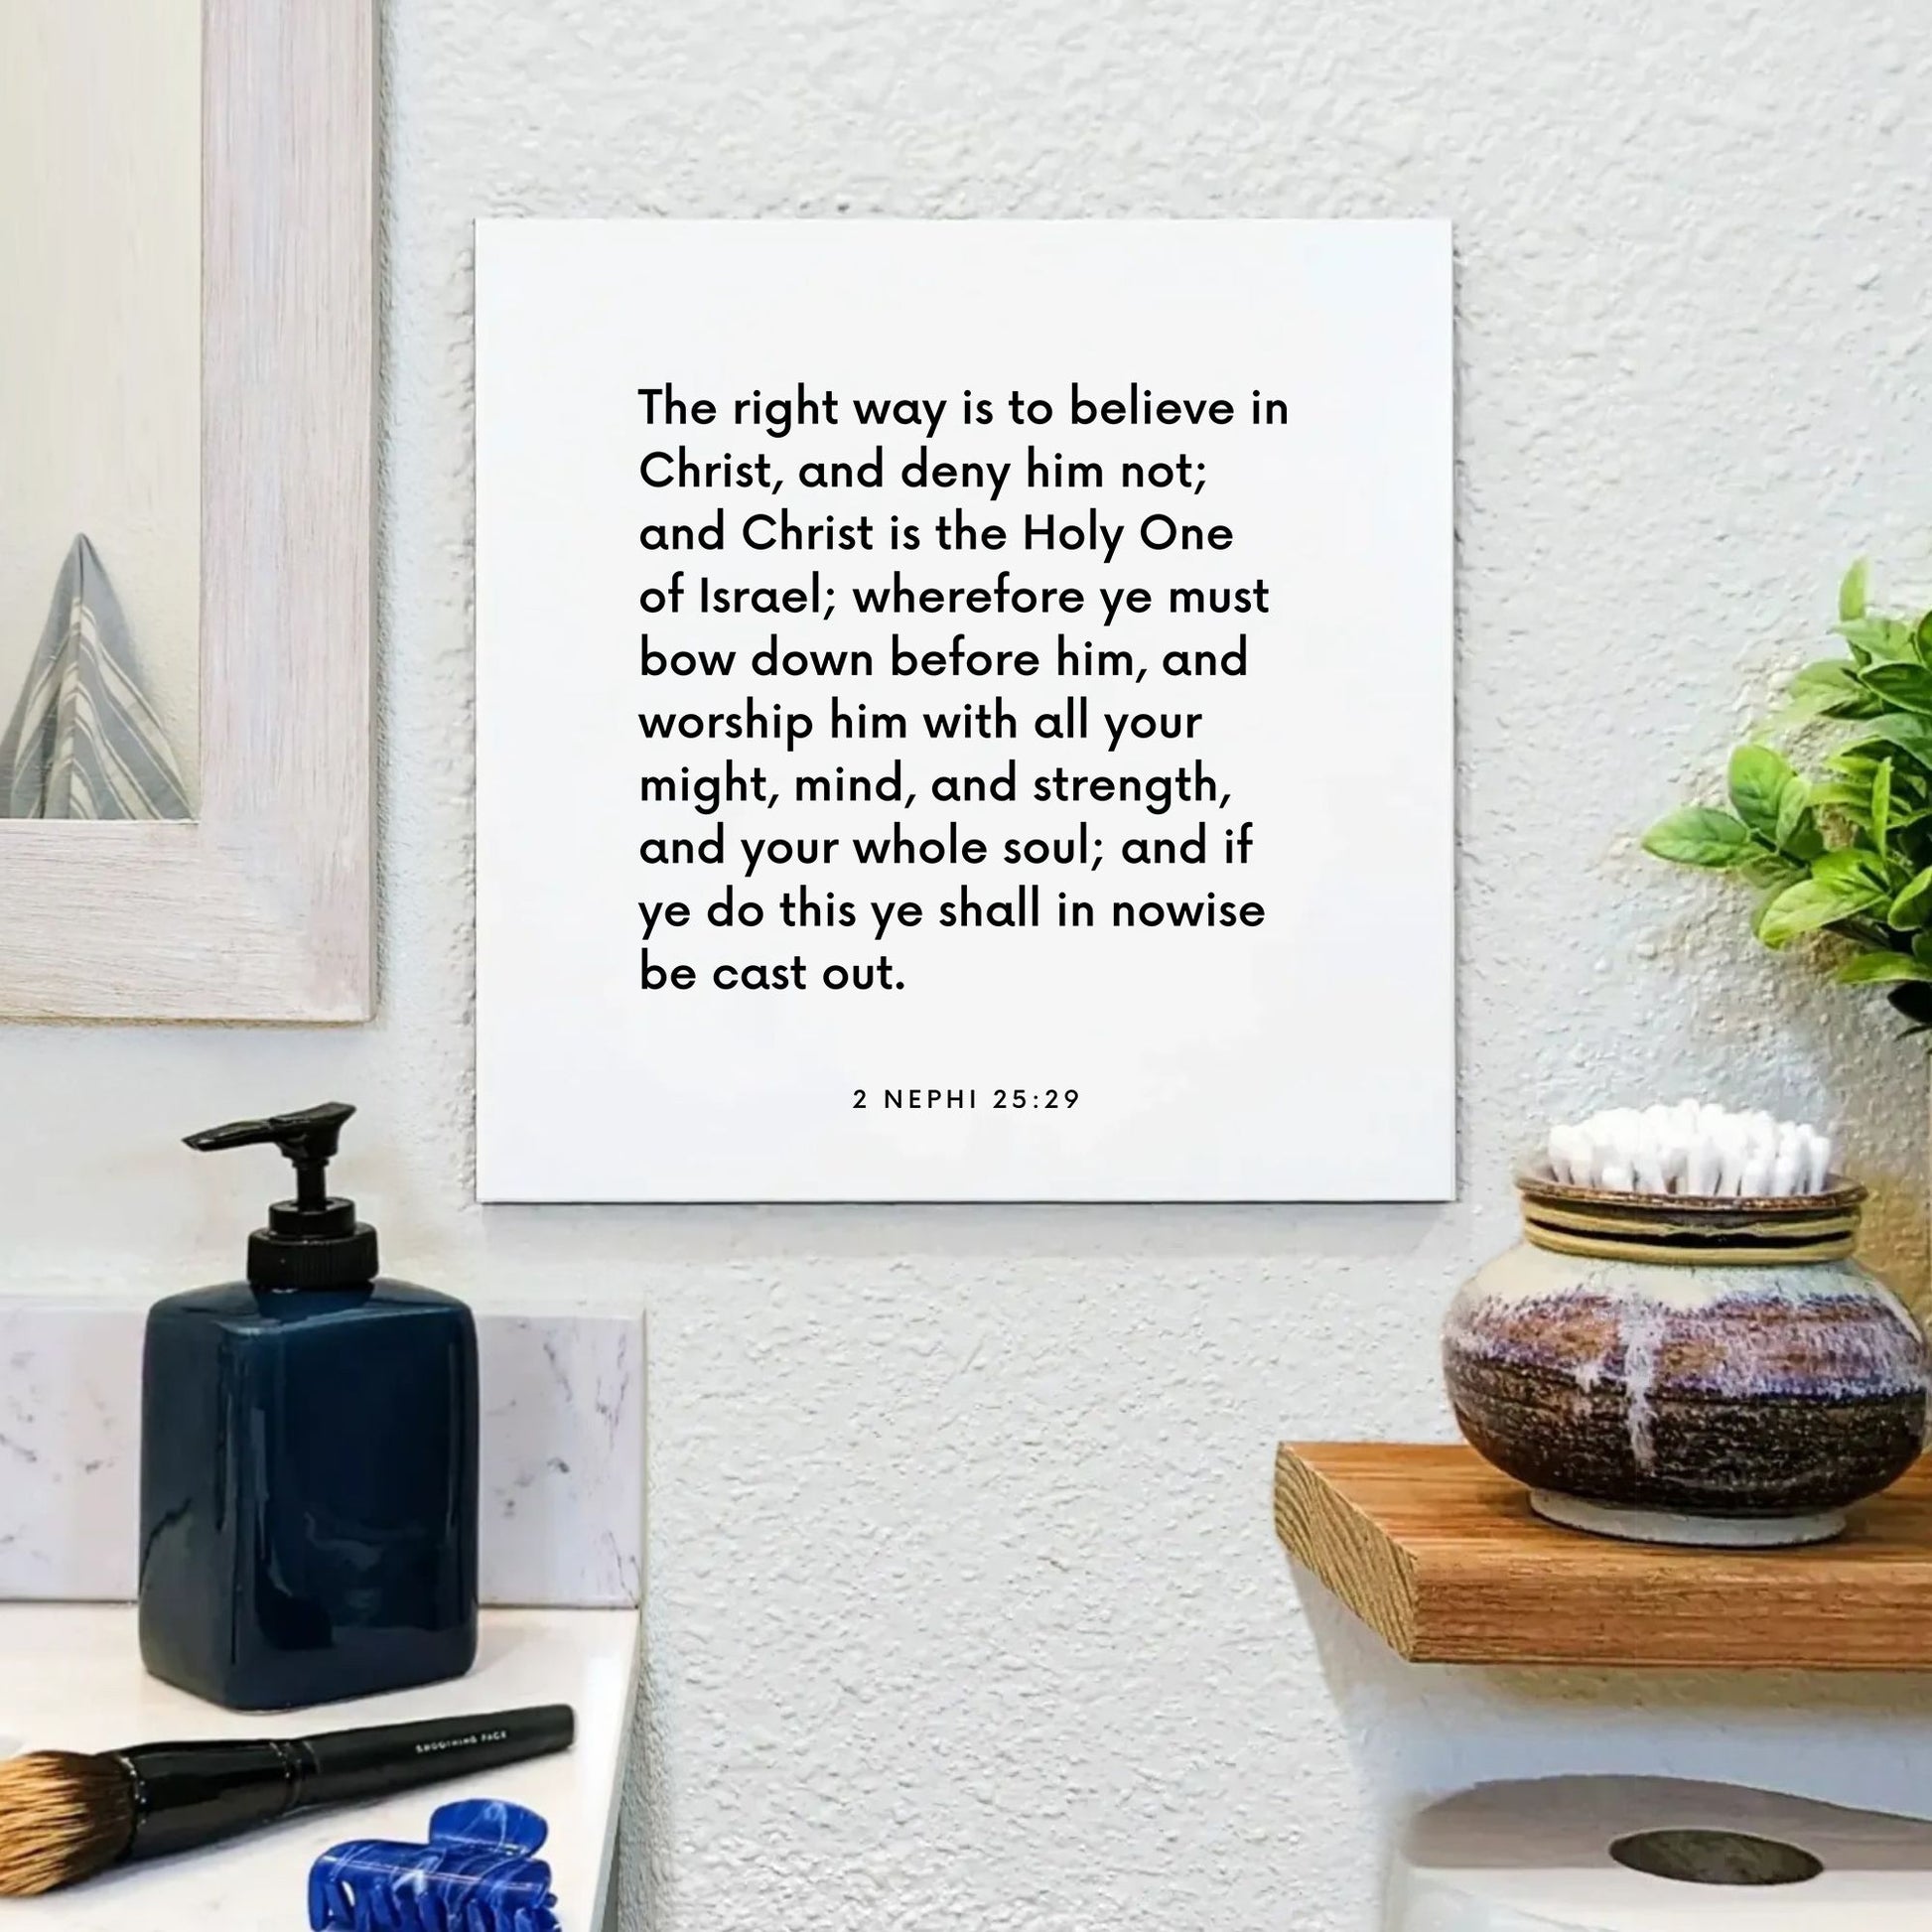 Bathroom mouting of the scripture tile for 2 Nephi 25:29 - "The right way is to believe in Christ, and deny him not"